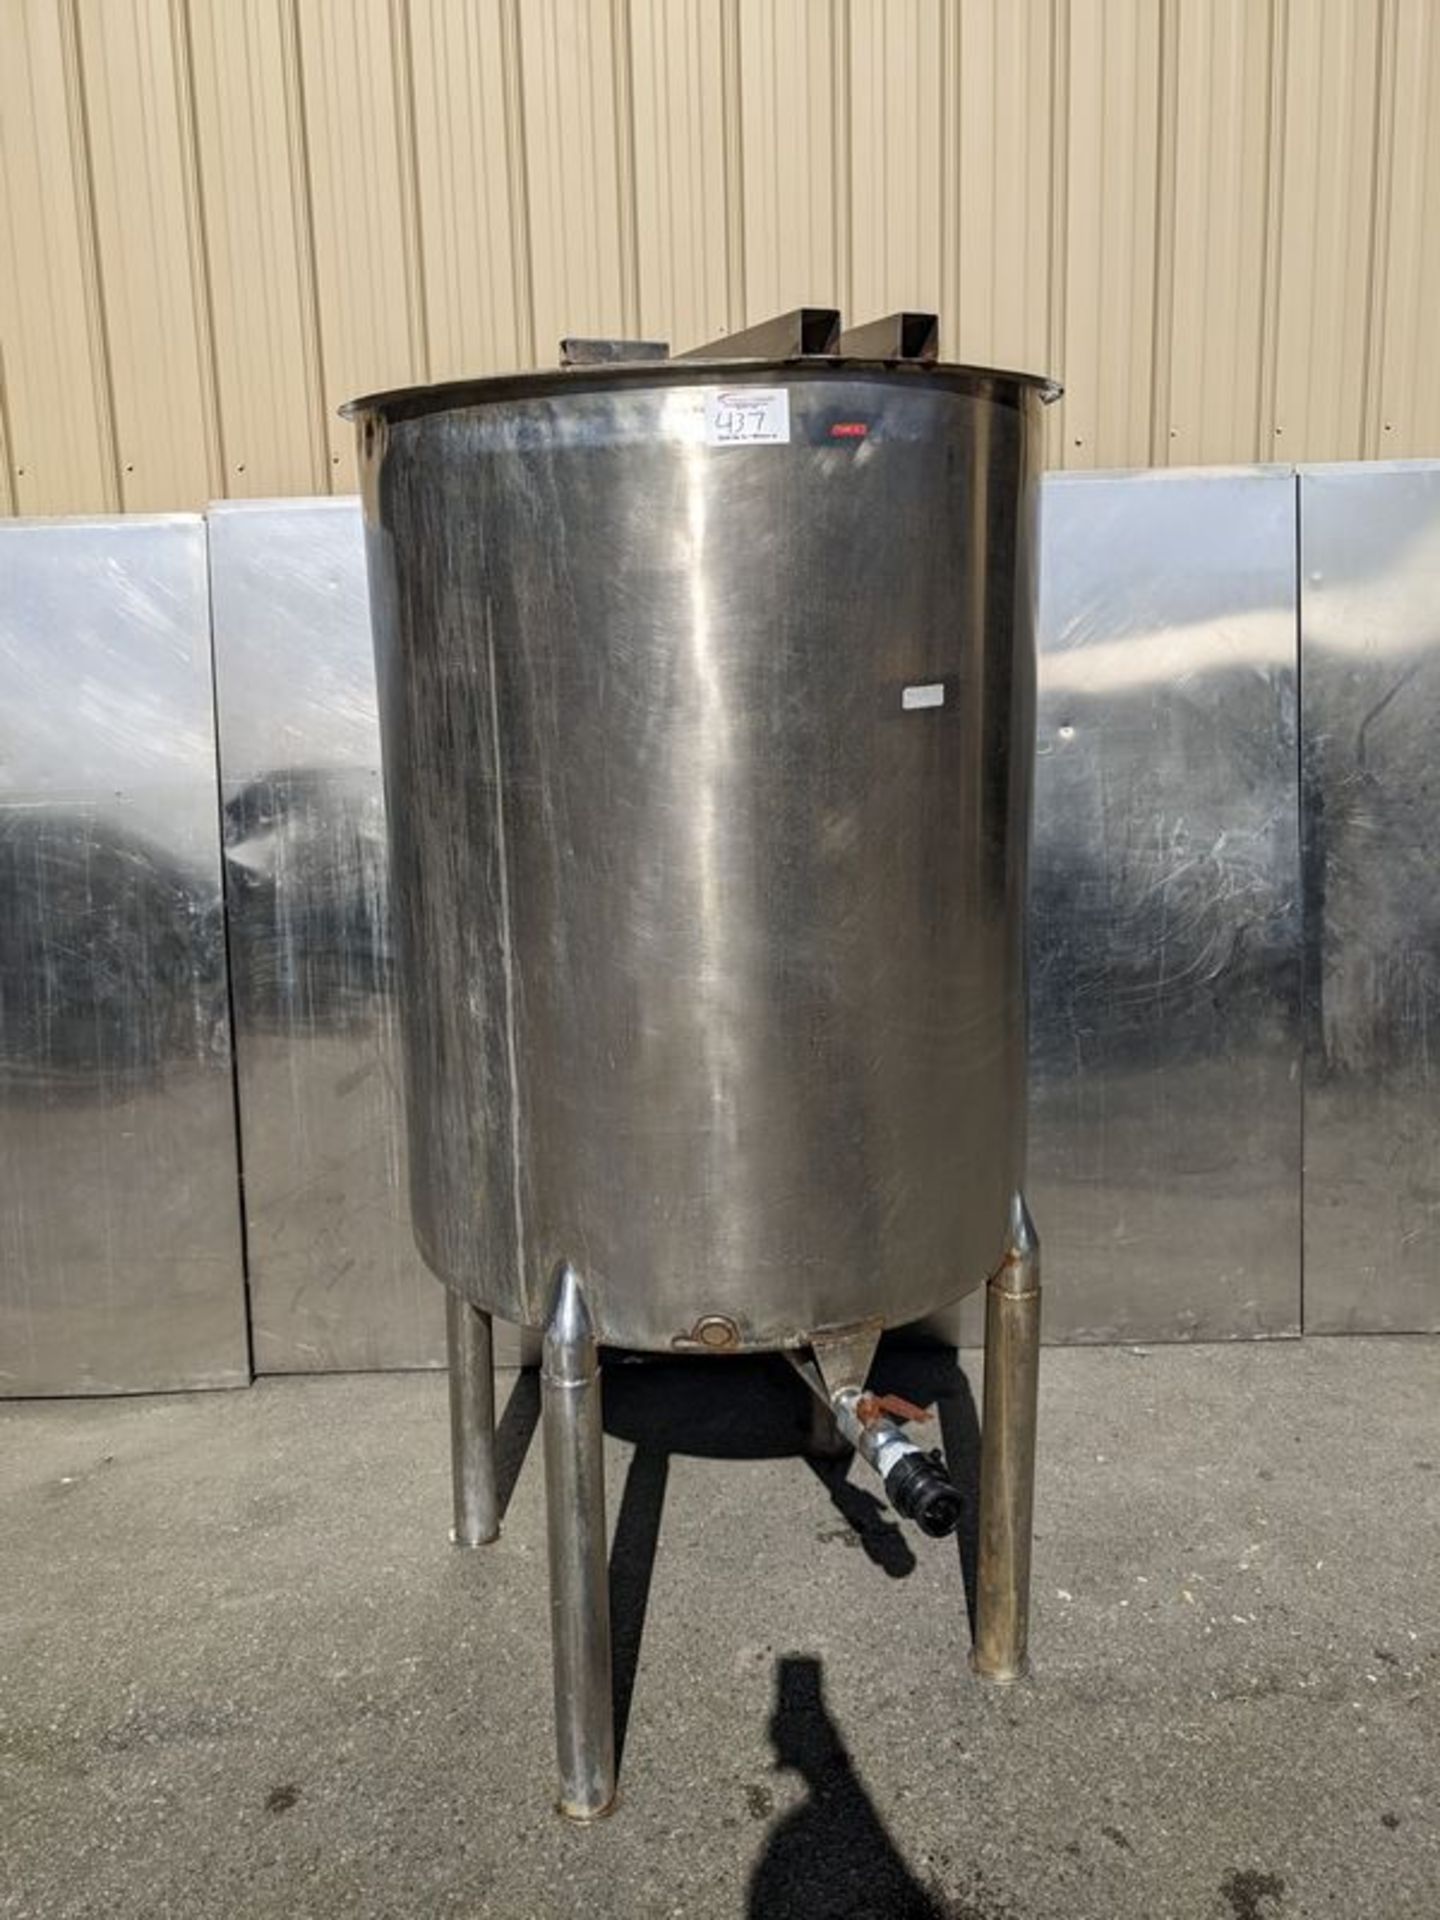 Stainless Steel Tank with Spout - 48" High x 40" Wide